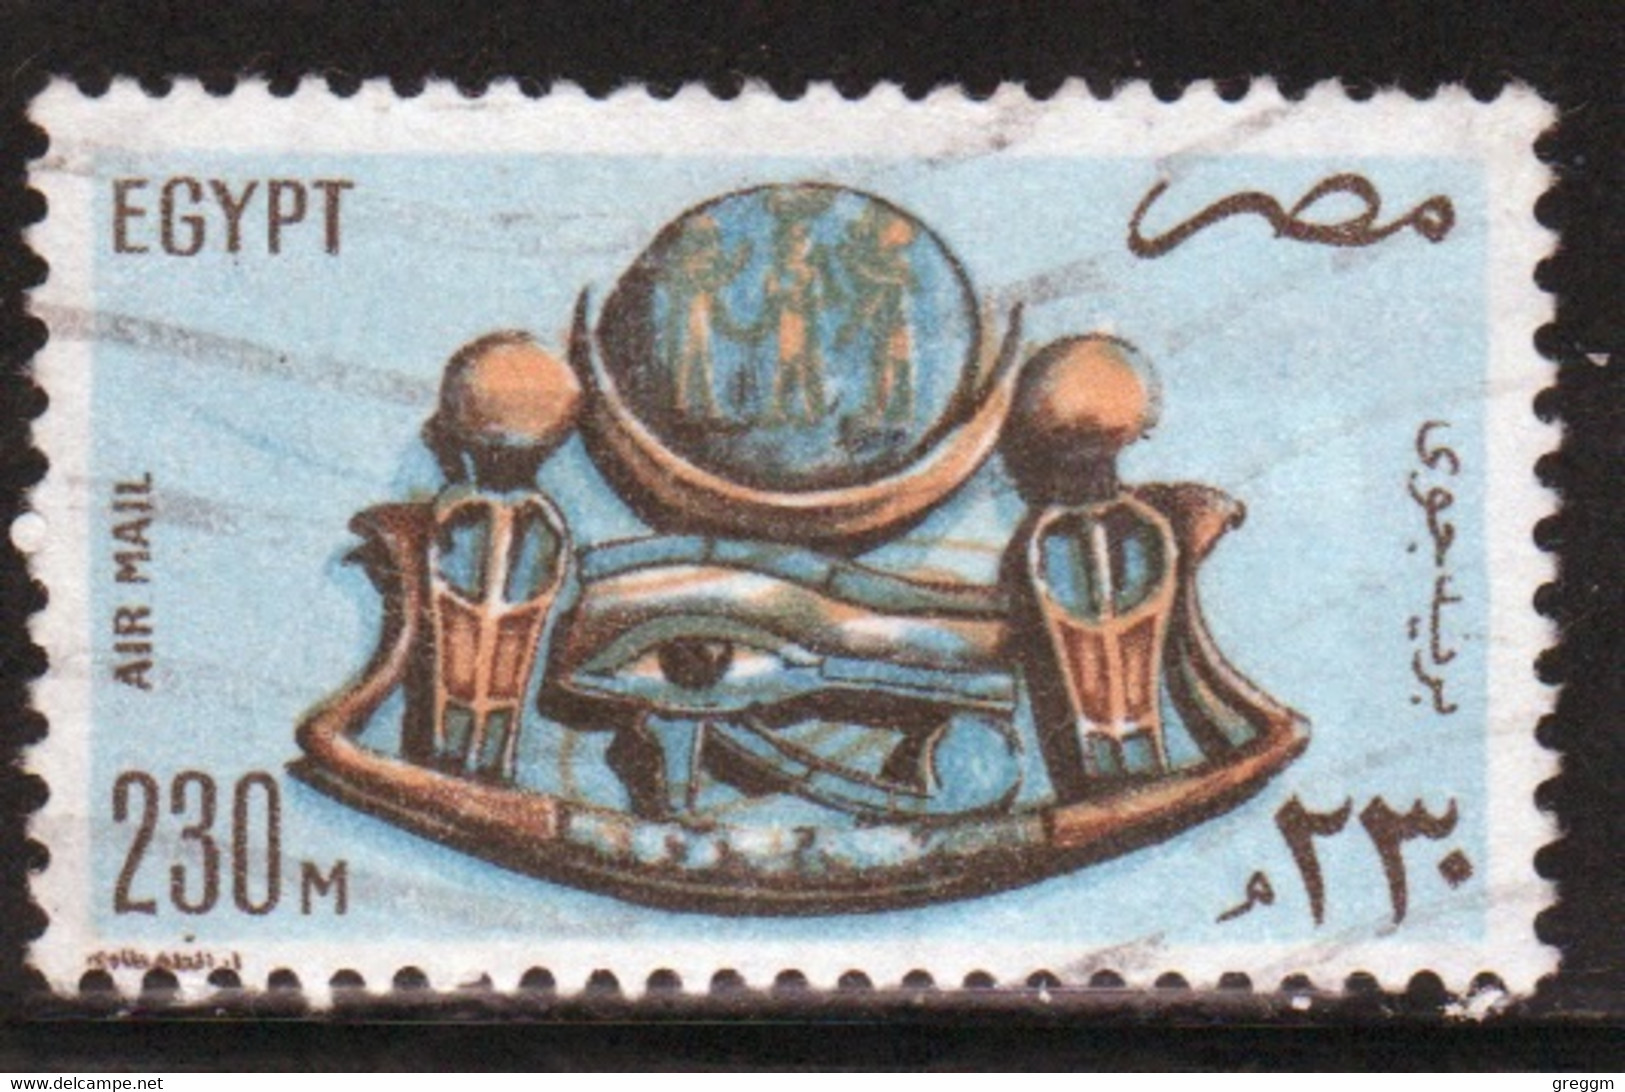 Egypt UAR 1981 Single 230m Stamp Issued To Celebrate Air In Fine Used - Used Stamps